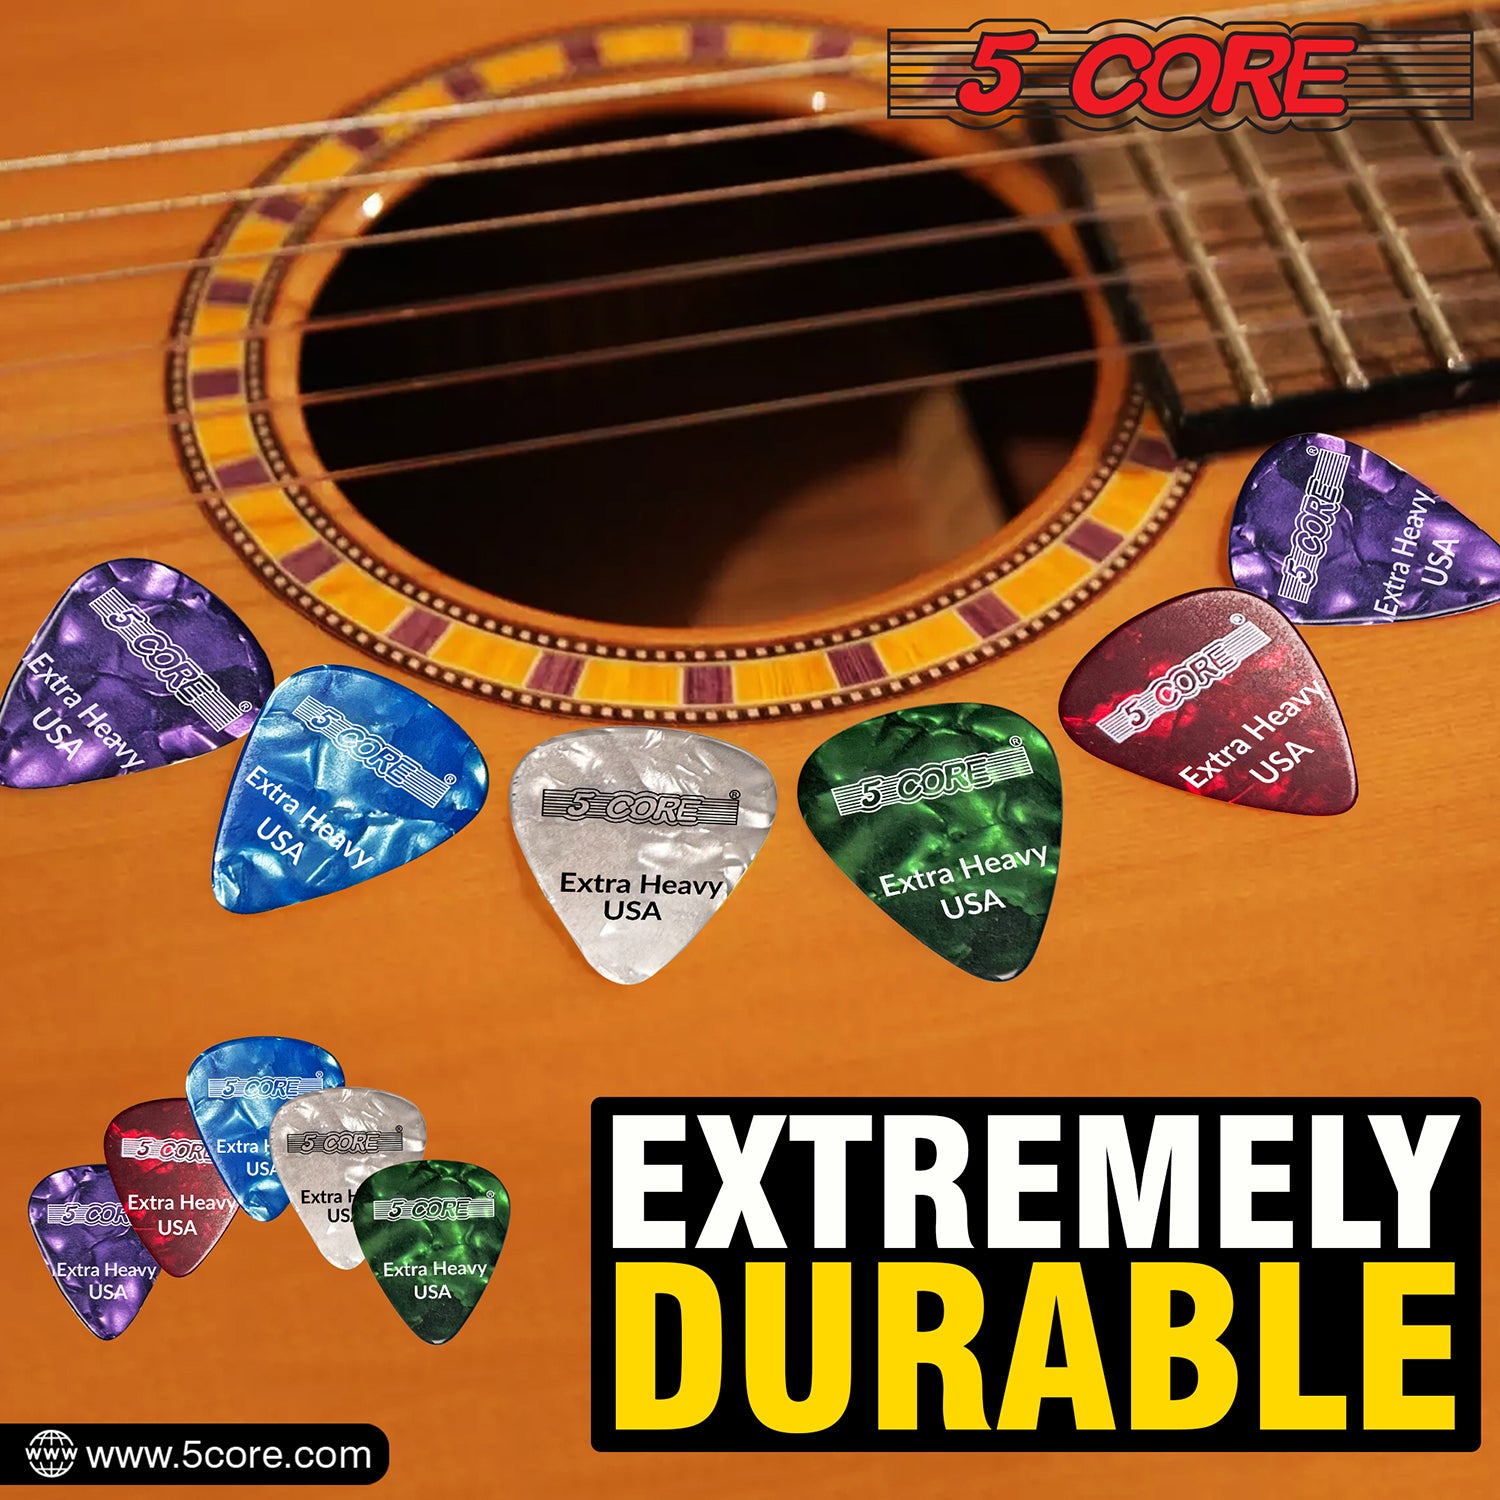 5 Core Celluloid Guitar Picks 20Pack  Extra Heavy Gauge Plectrums for Acoustic Electric Bass Guitar